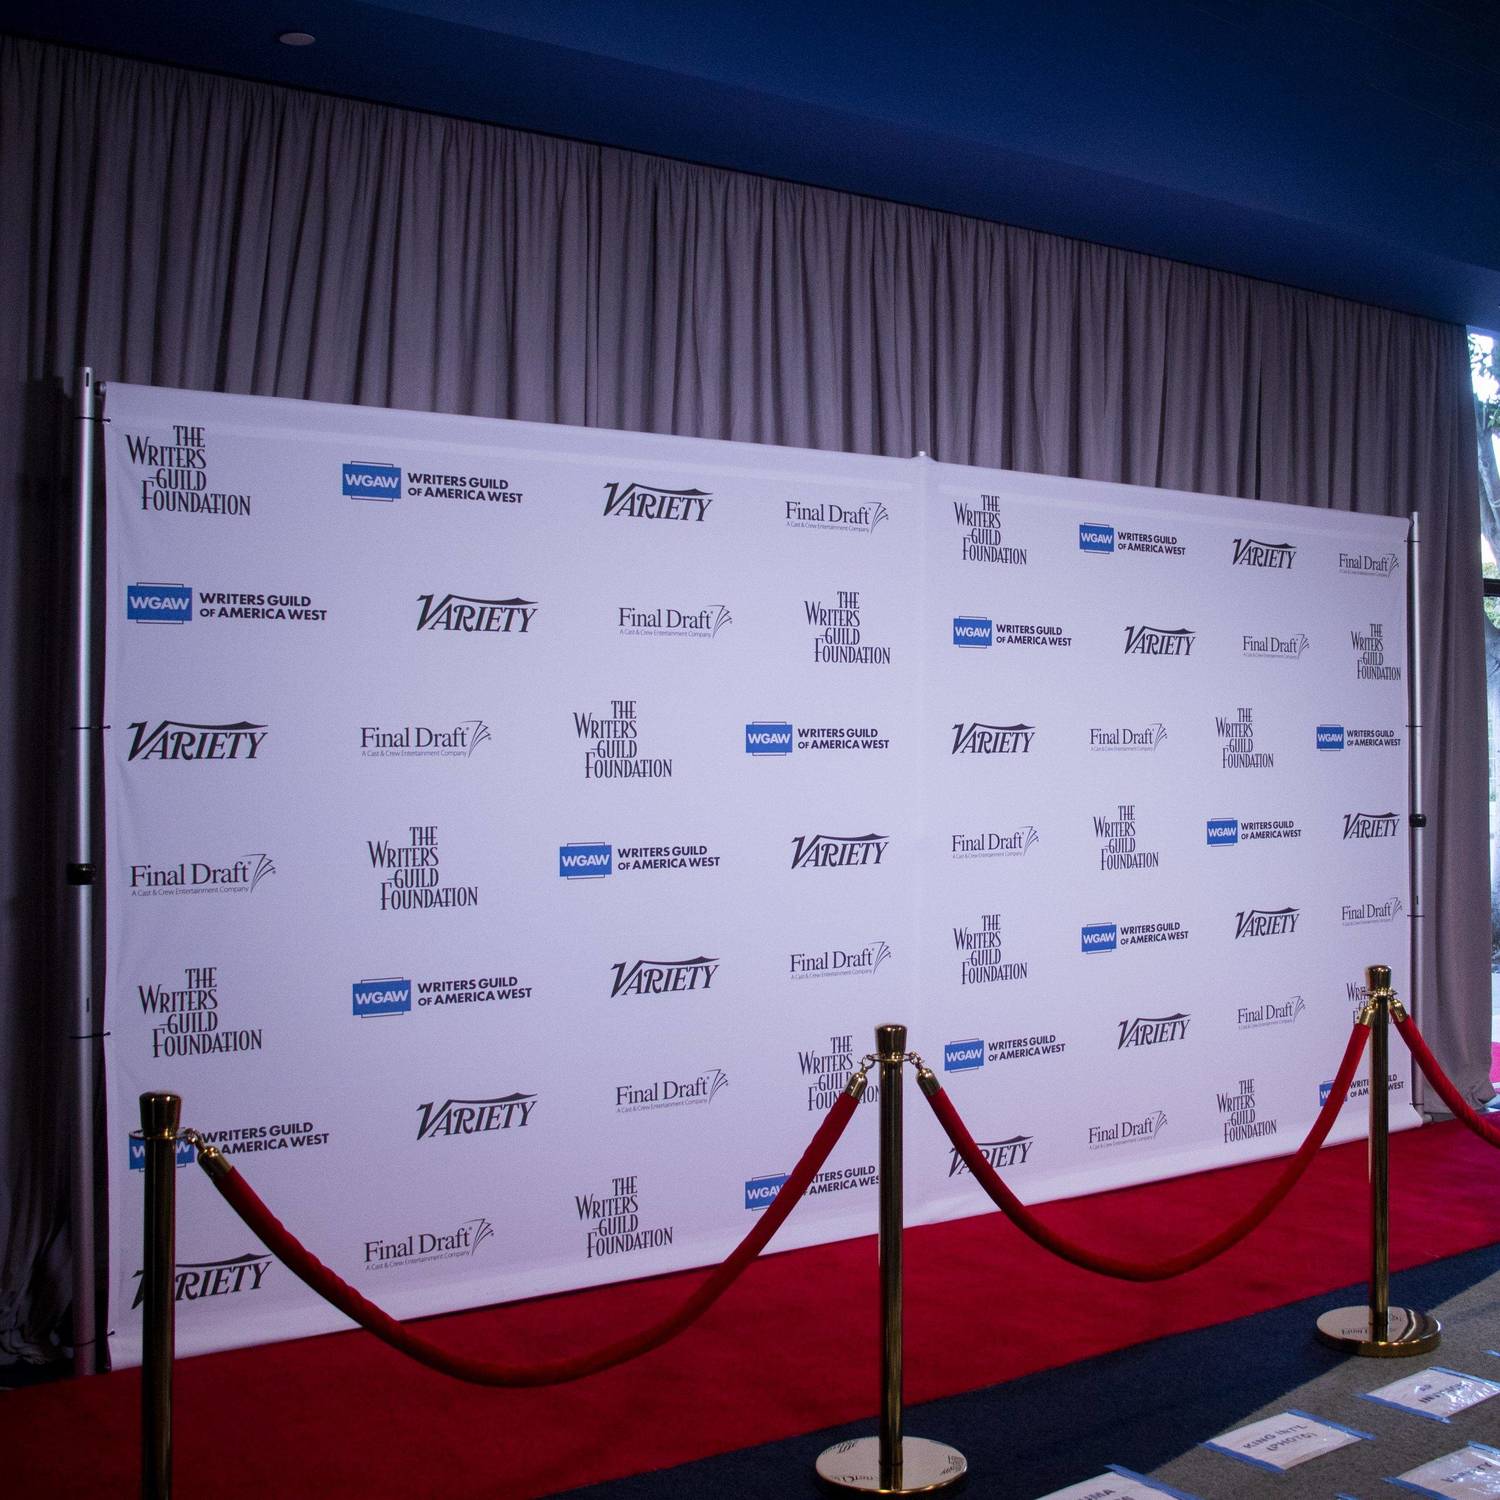 Backdrop and redcarpet